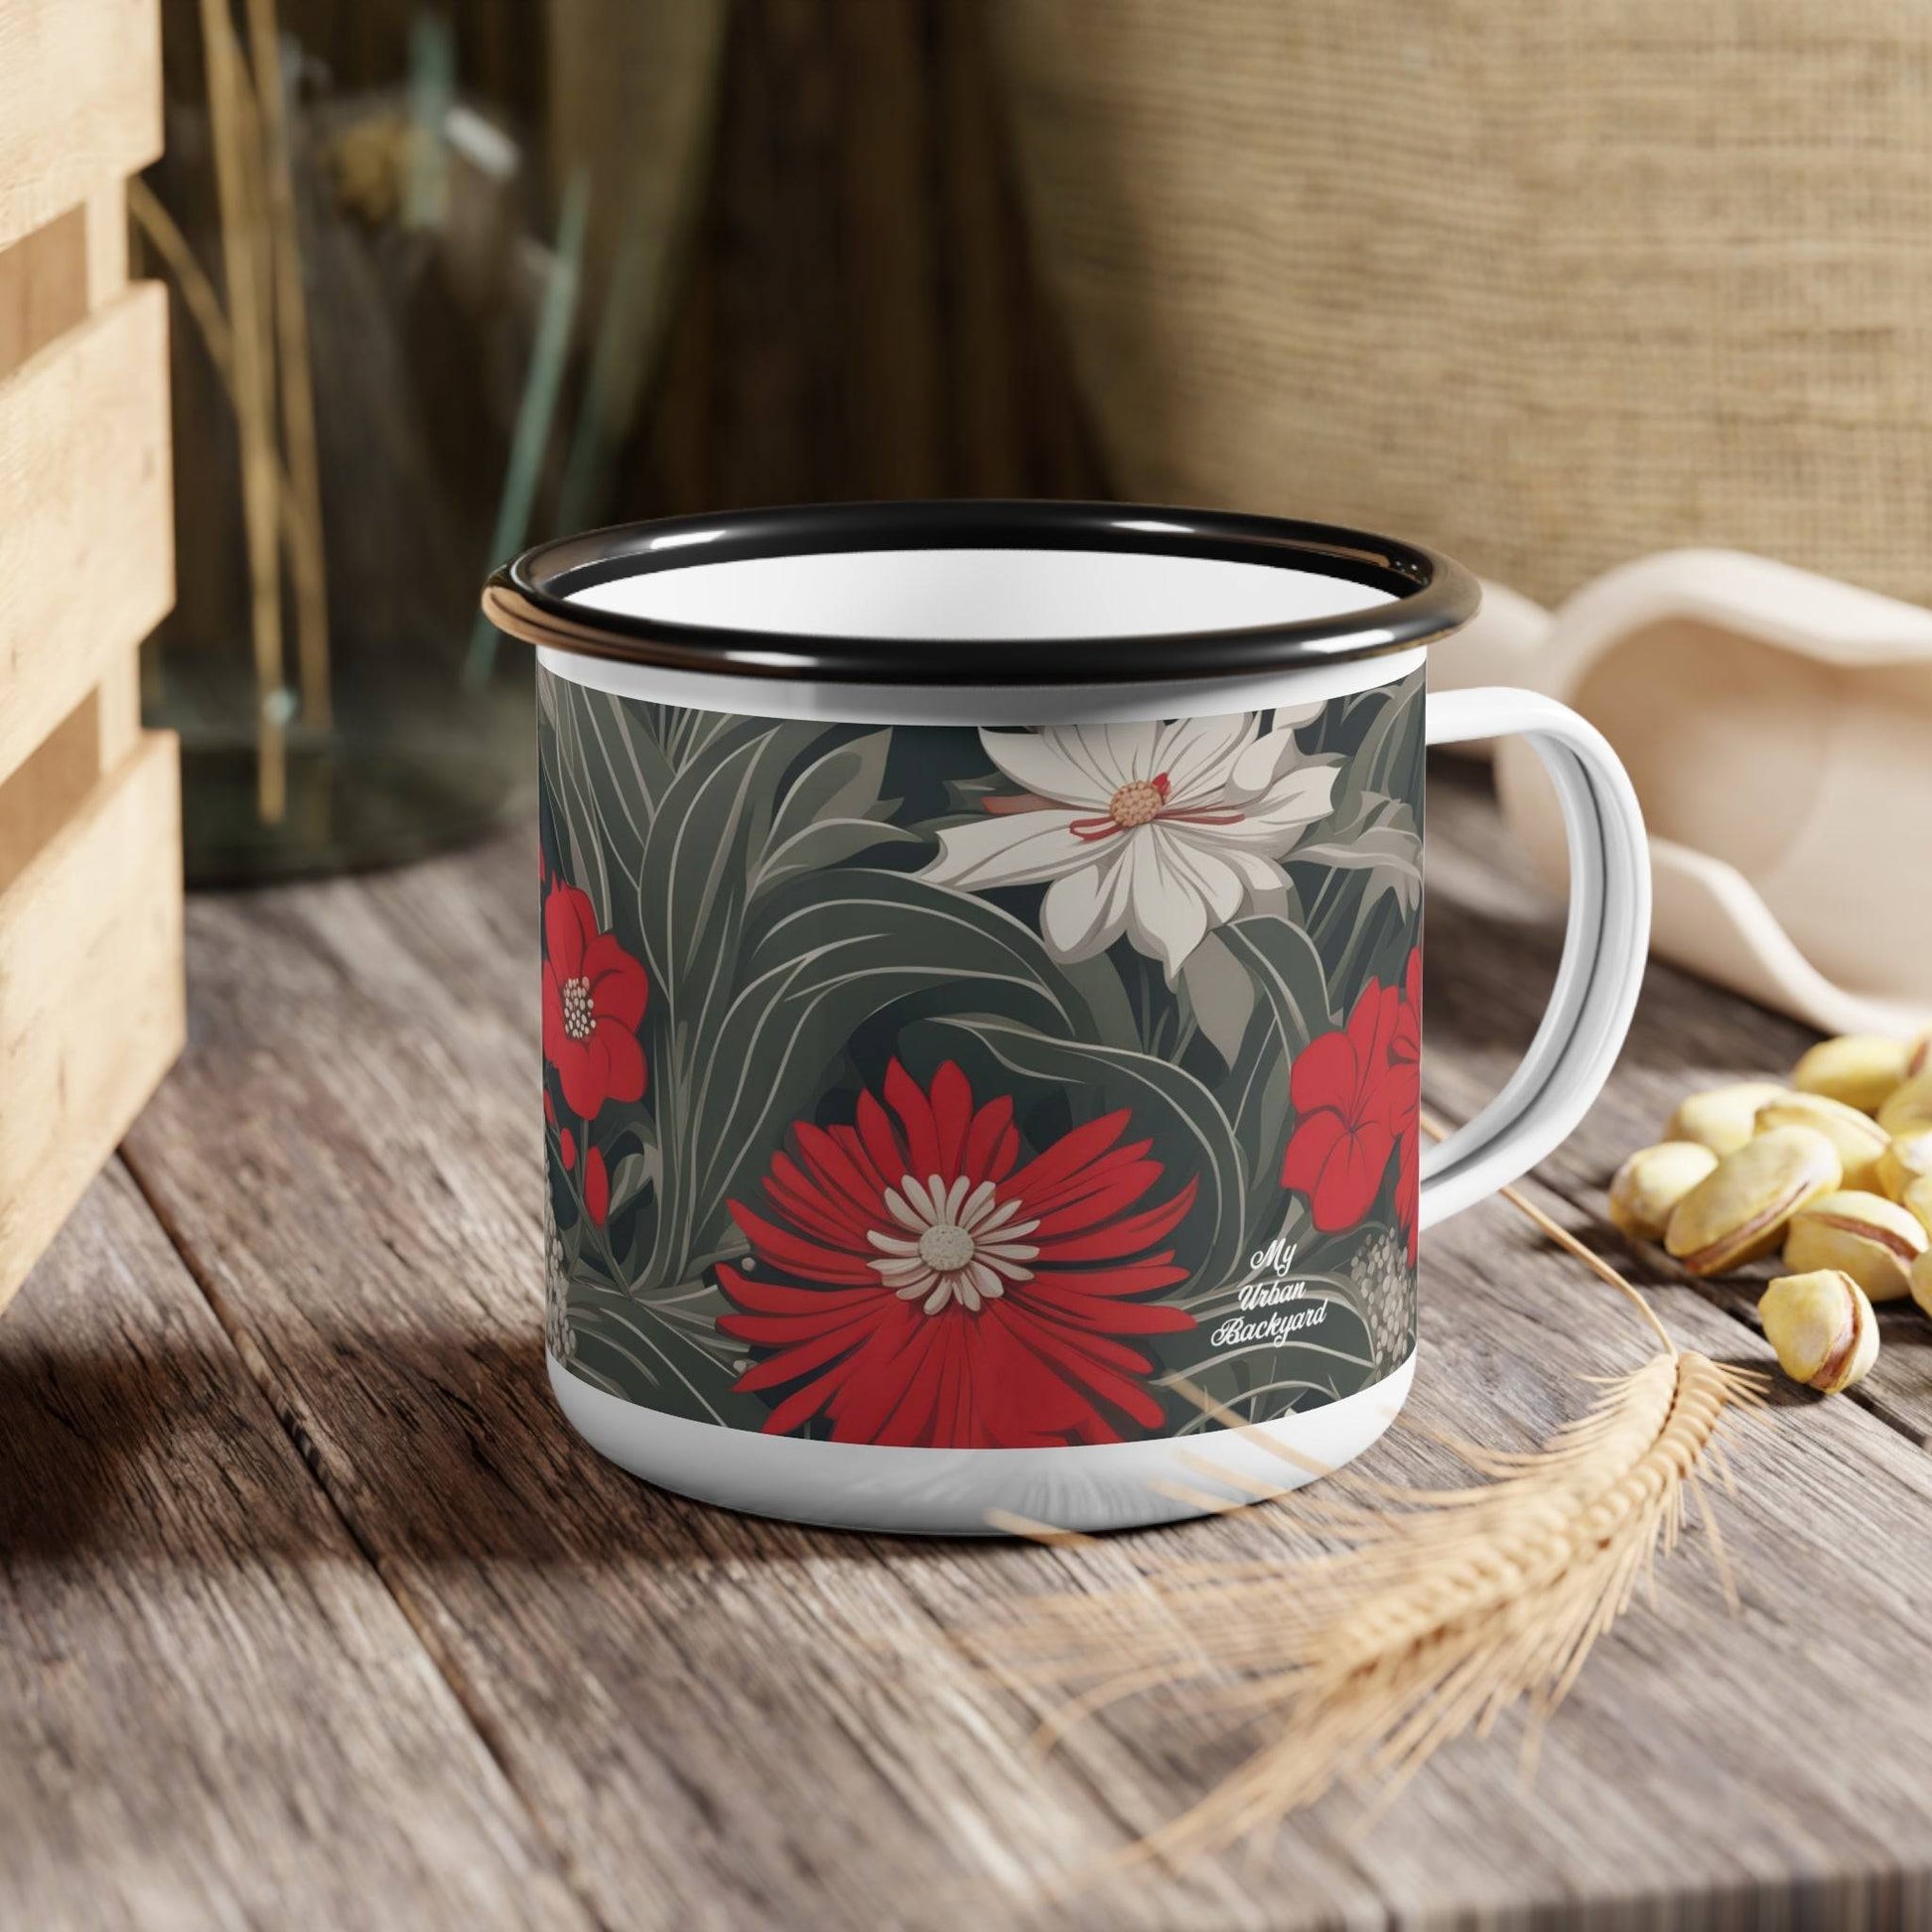 Enamel Camping Mug for Coffee, Tea, Hot Cocoa, Cereal, 12oz, Red & White Flowers